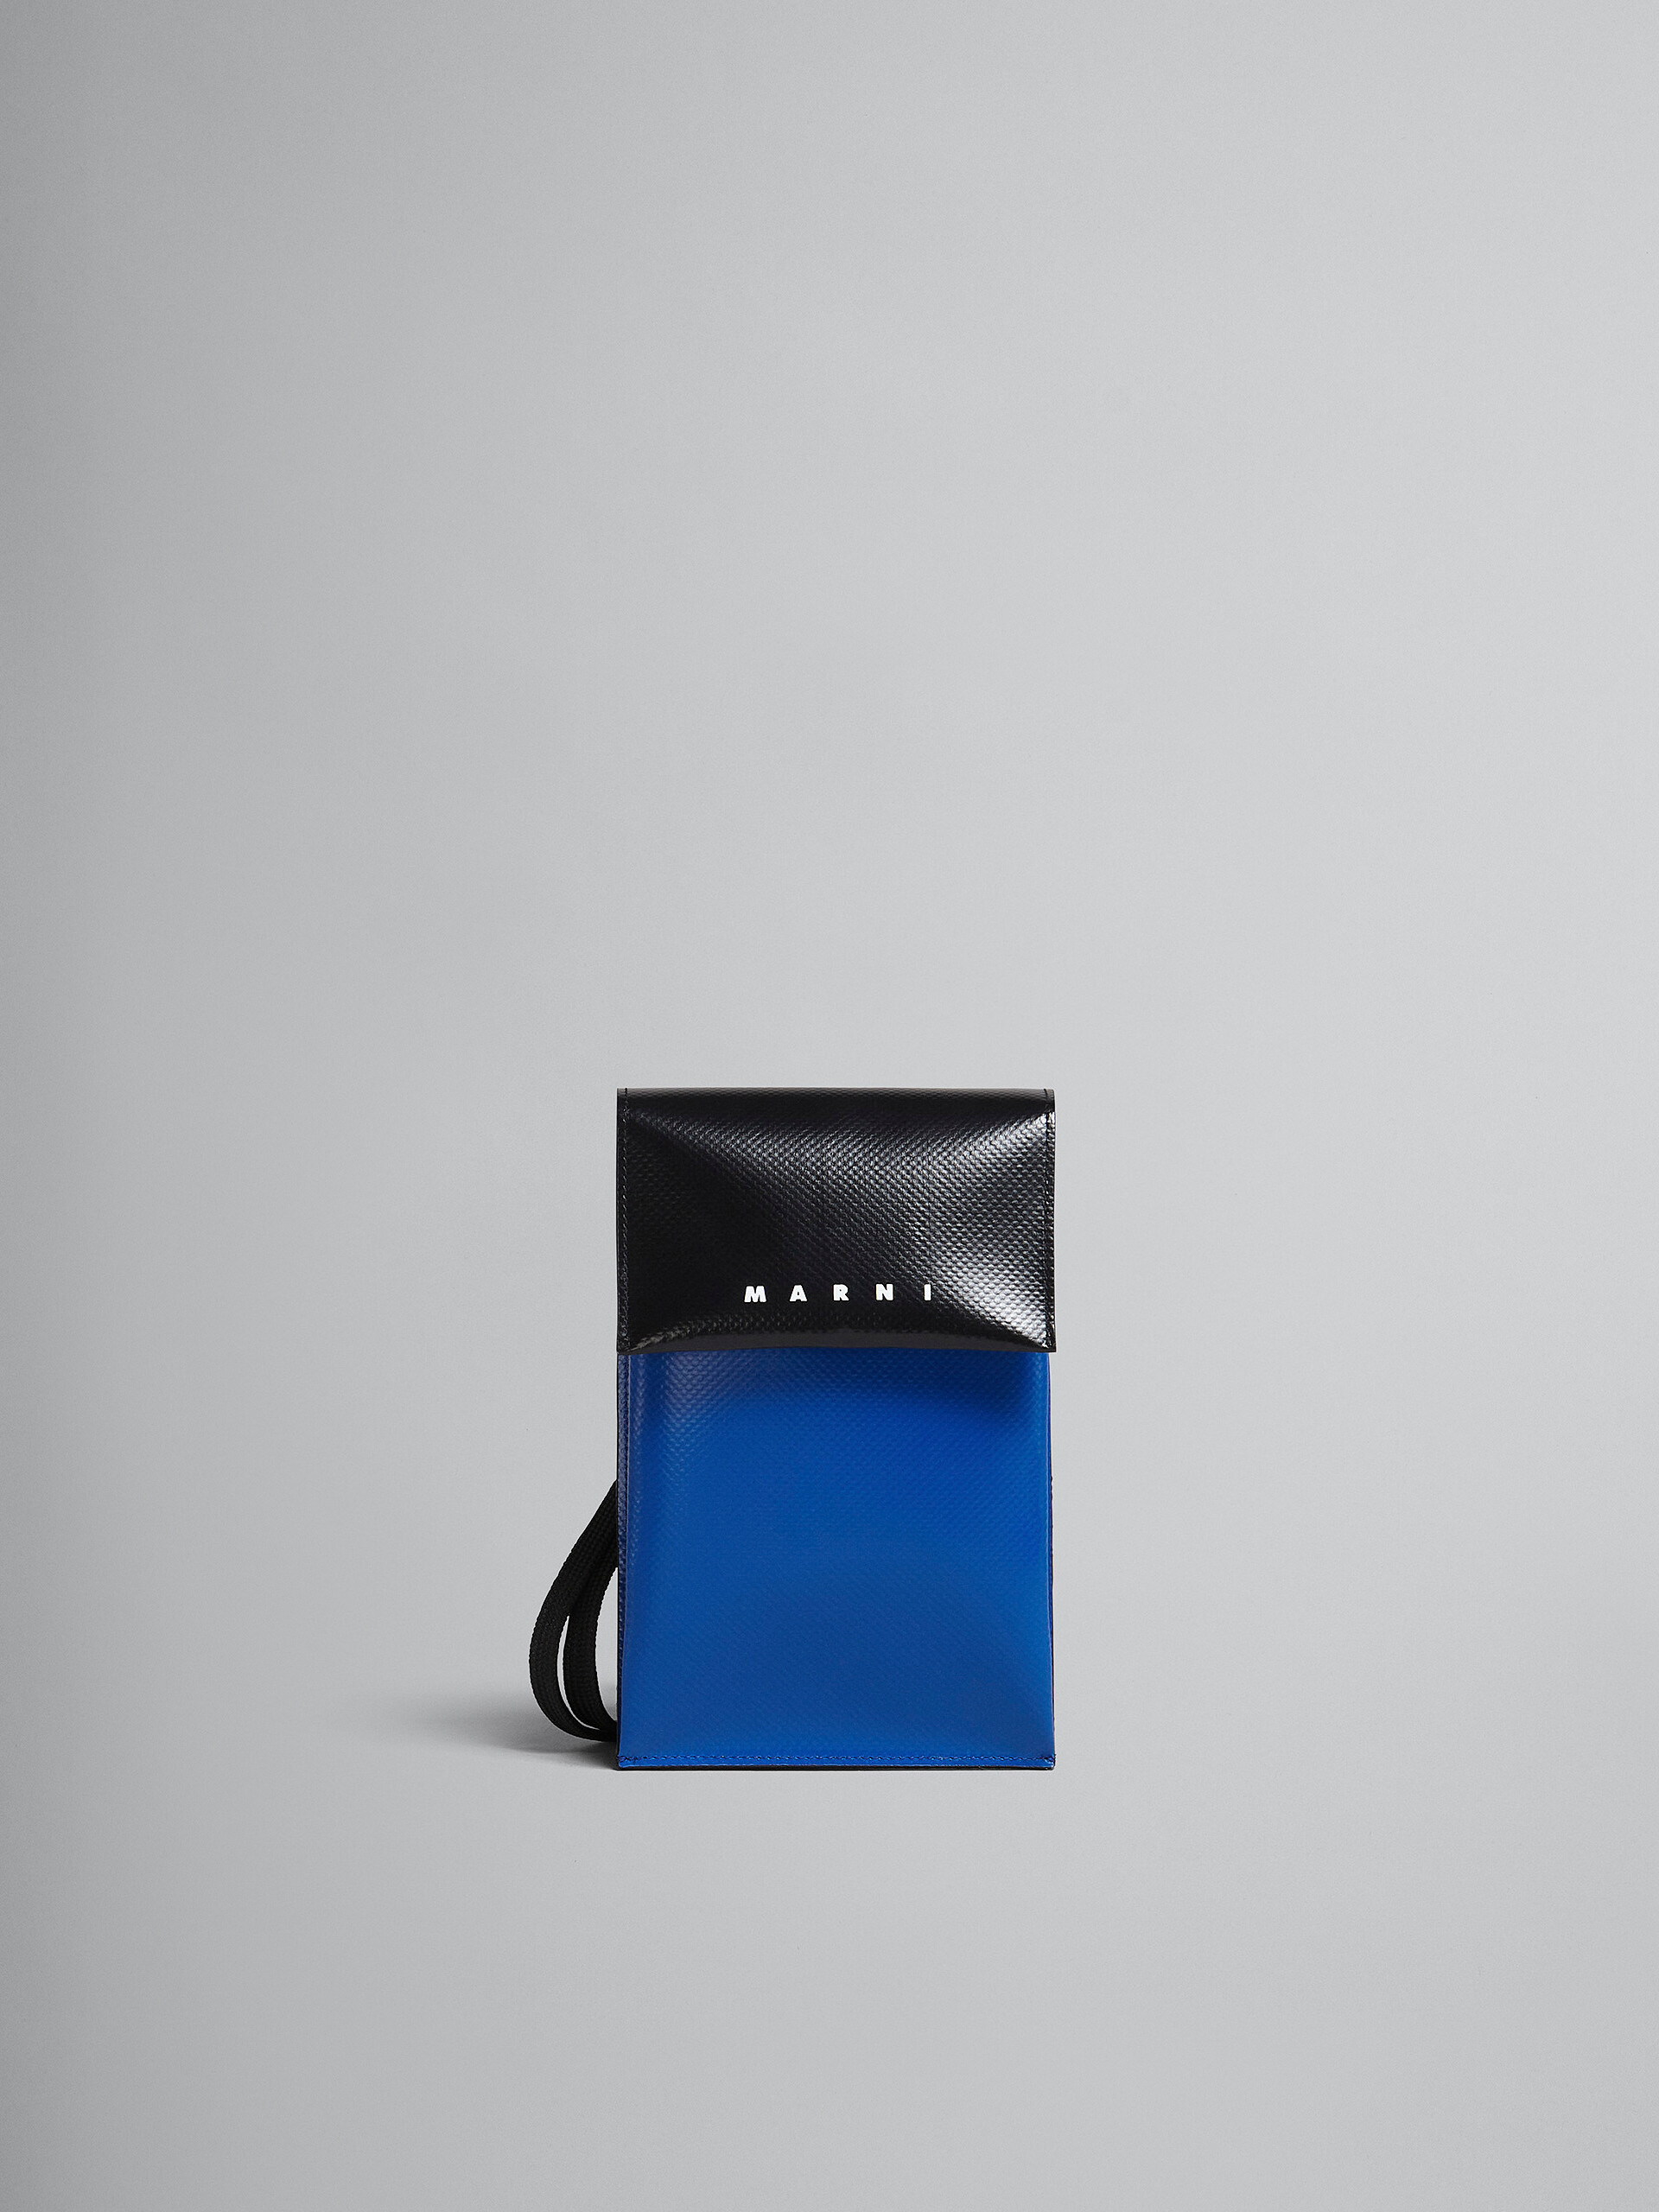 Black and blue phone case - Wallets and Small Leather Goods - Image 1